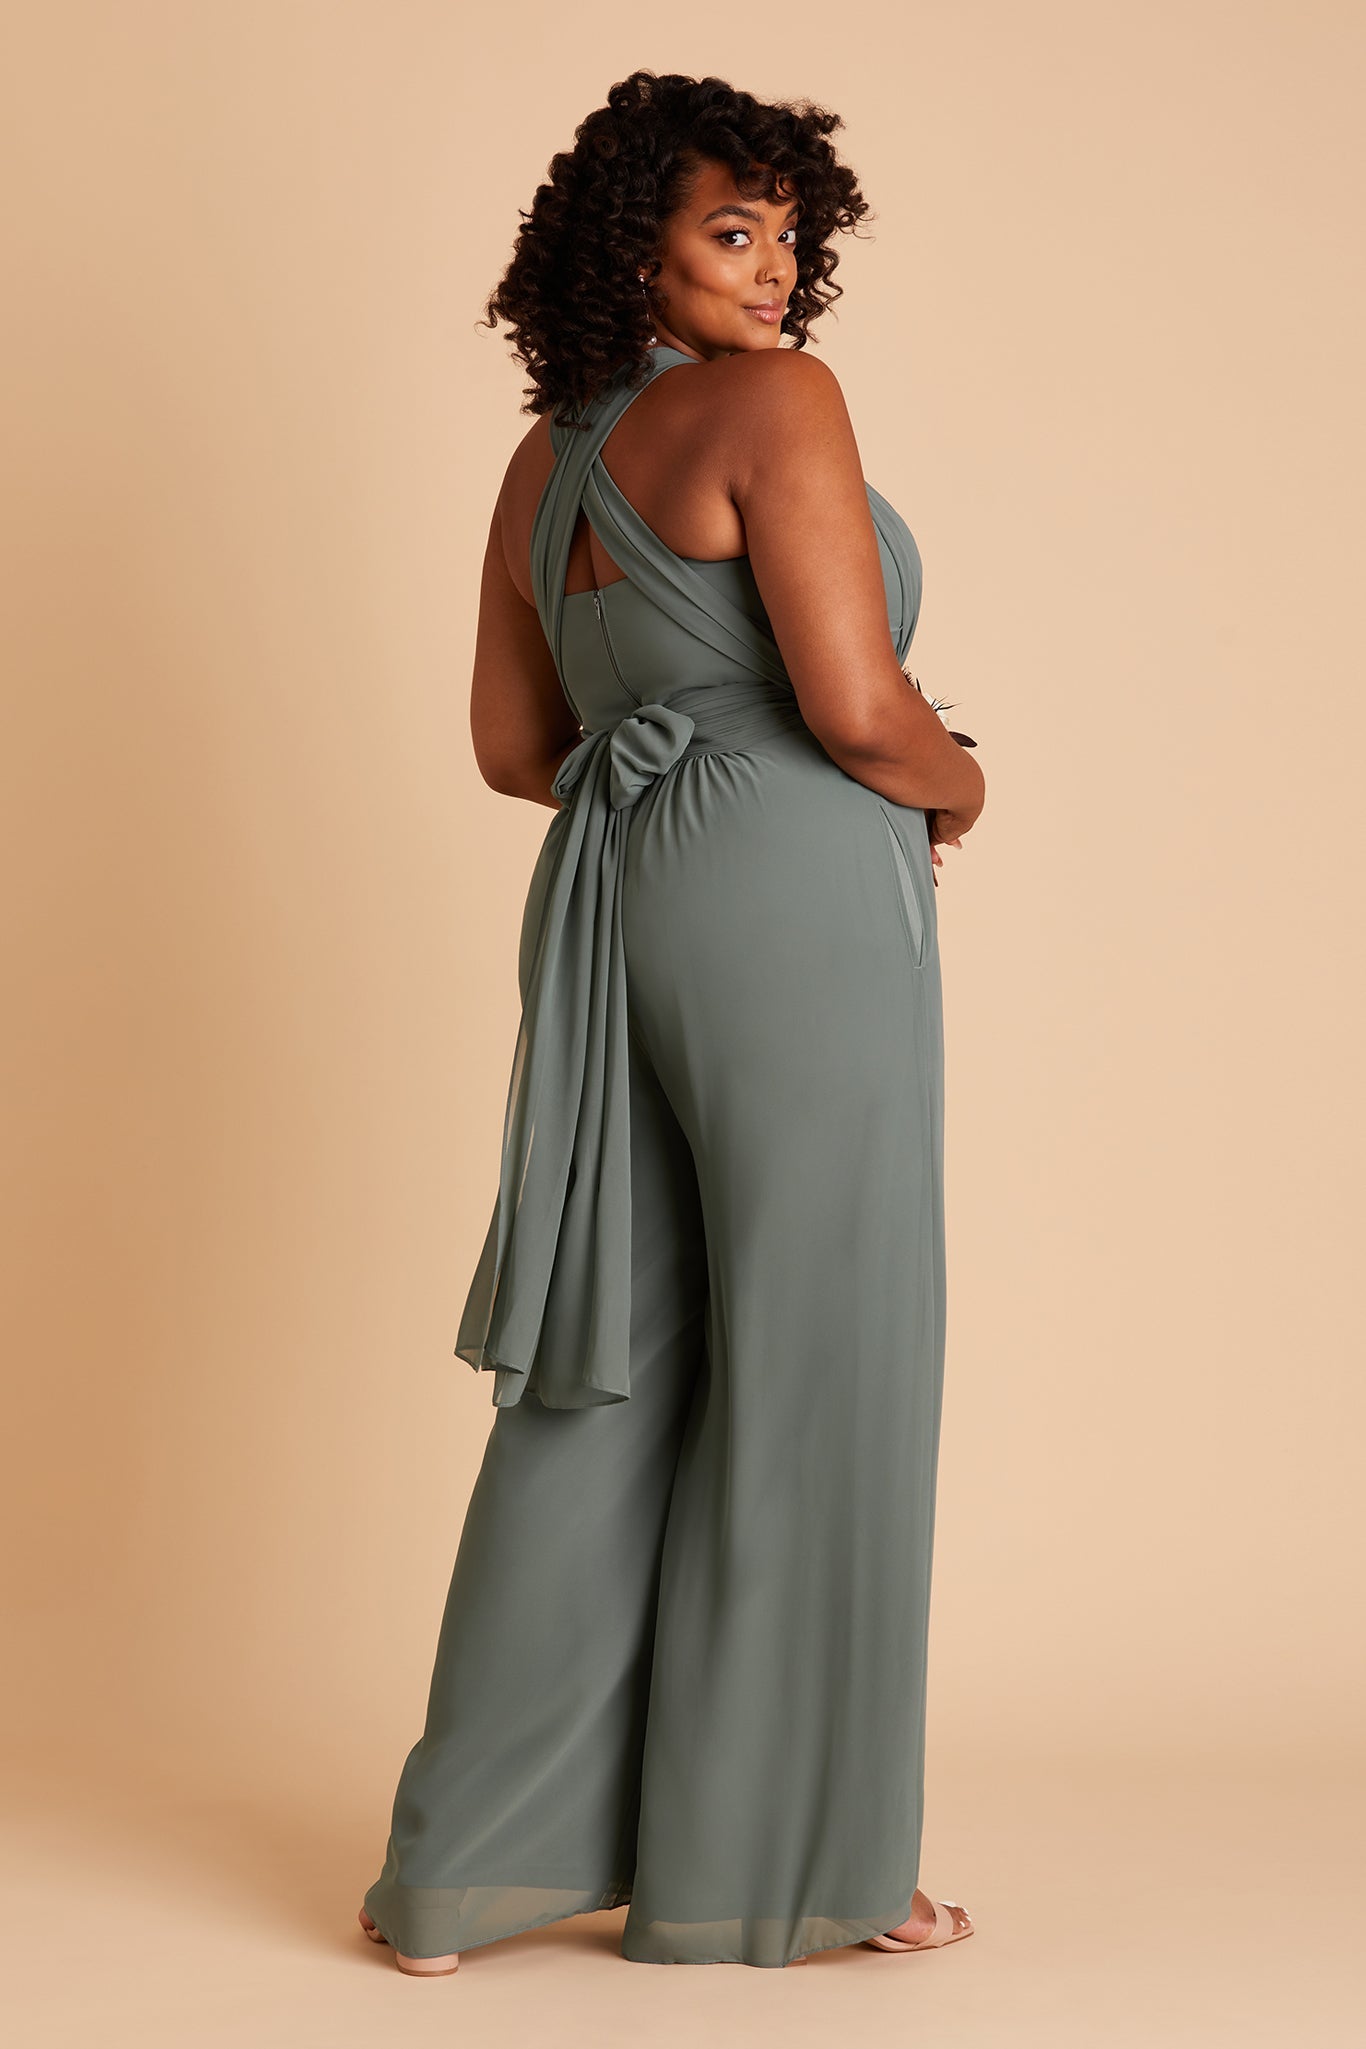 Gigi plus size convertible jumpsuit in sea glass chiffon by Birdy Grey, back view